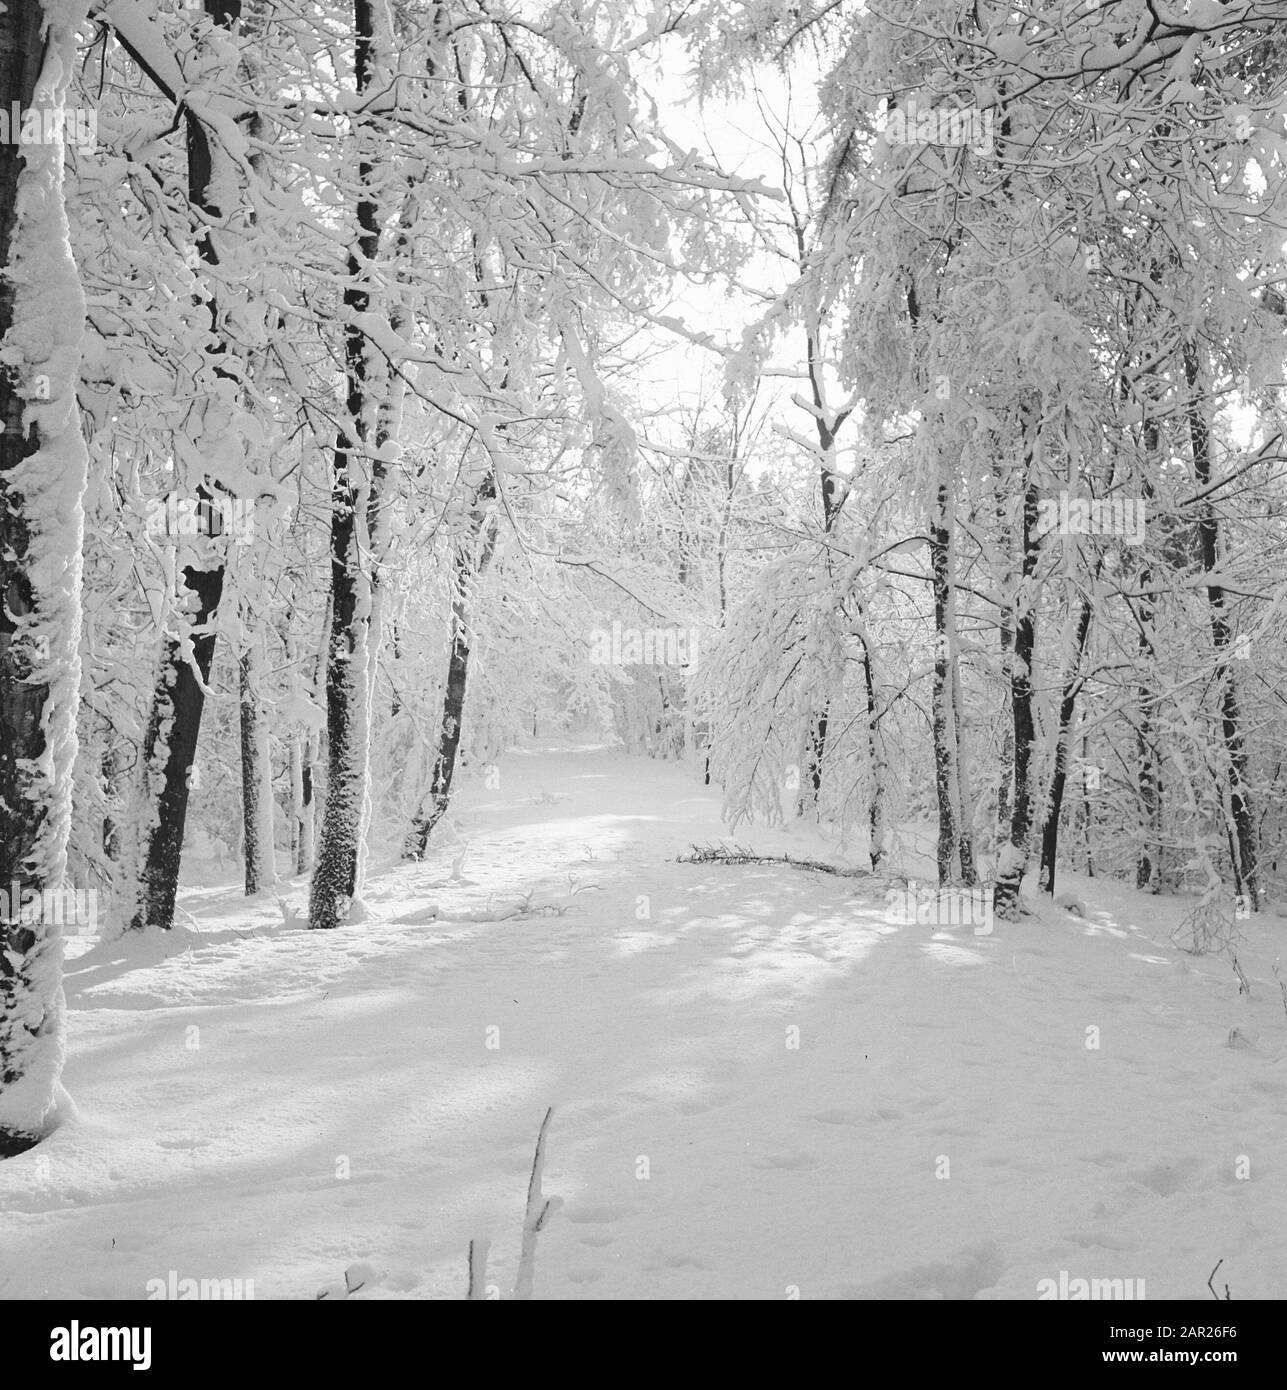 Park Zijpendaal in the winter Date: February 1958 Location: Arnhem Keywords: landscapes, natural beauty, parks, snow, winter, wild lands Stock Photo